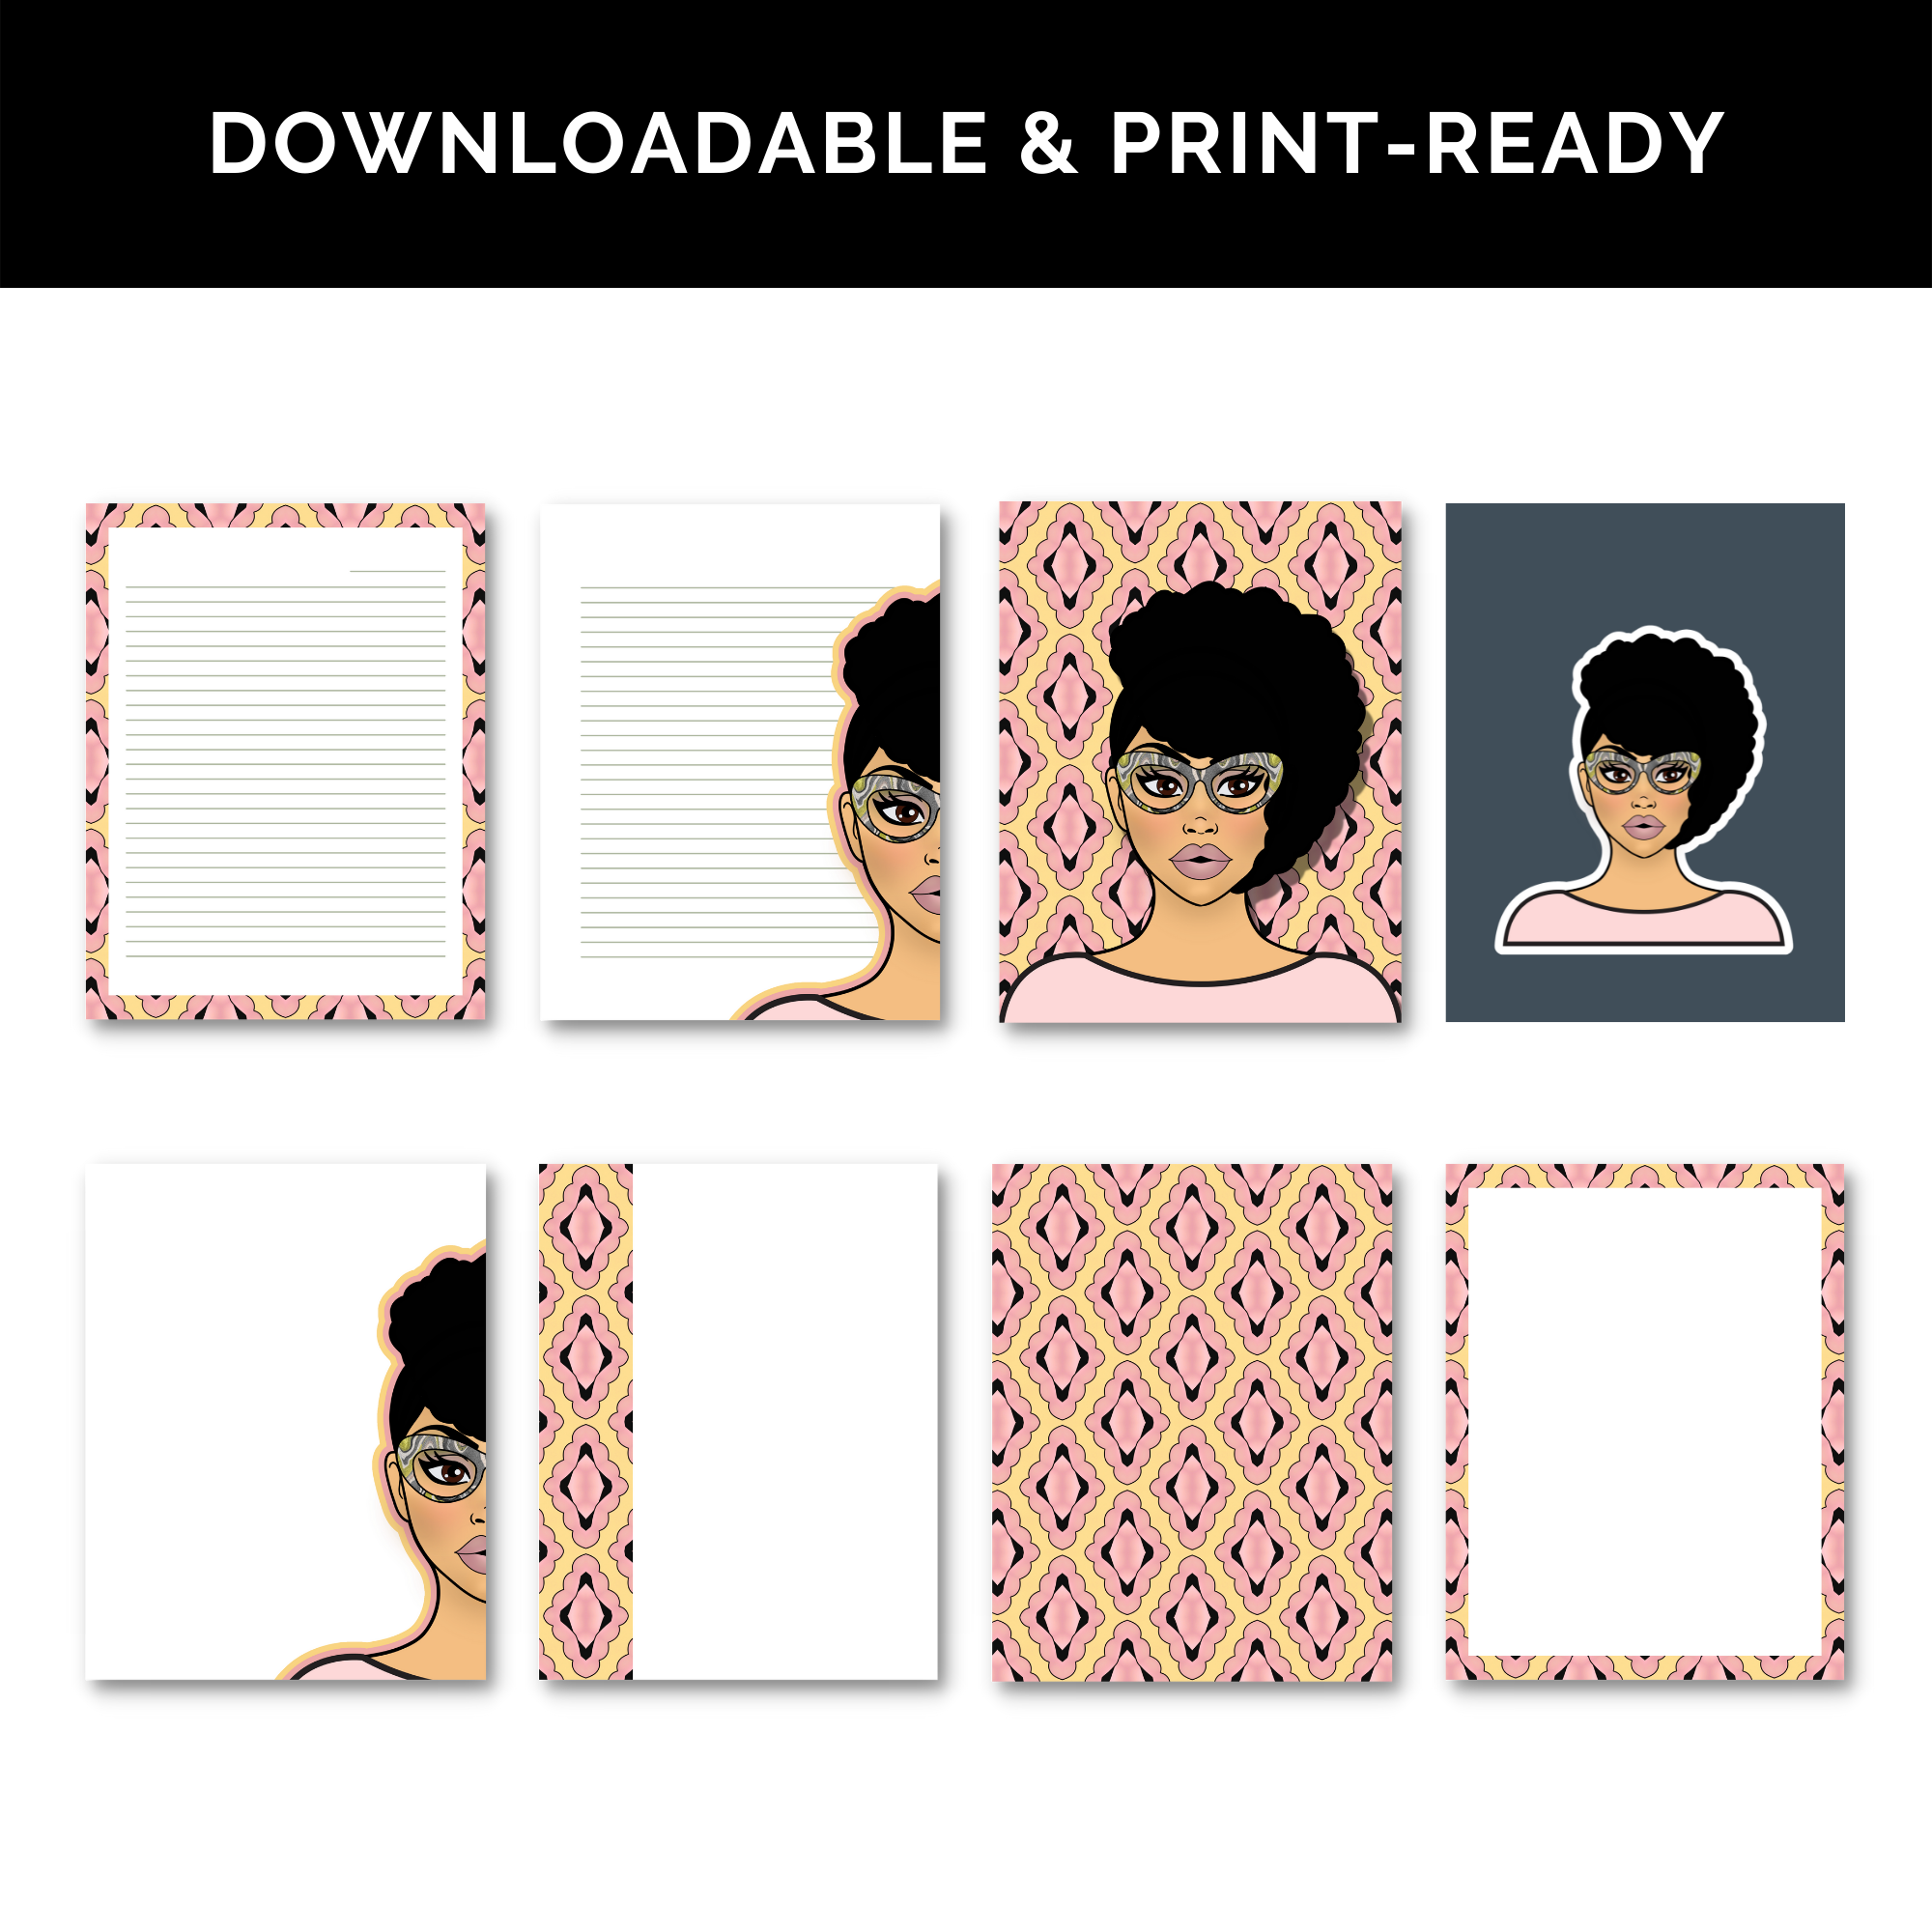 Digital & Printable Stationery Set, Planner/Journal Pages | Instant Download, Pink Yellow Arabesque Print - Lt African American | GoodNotes